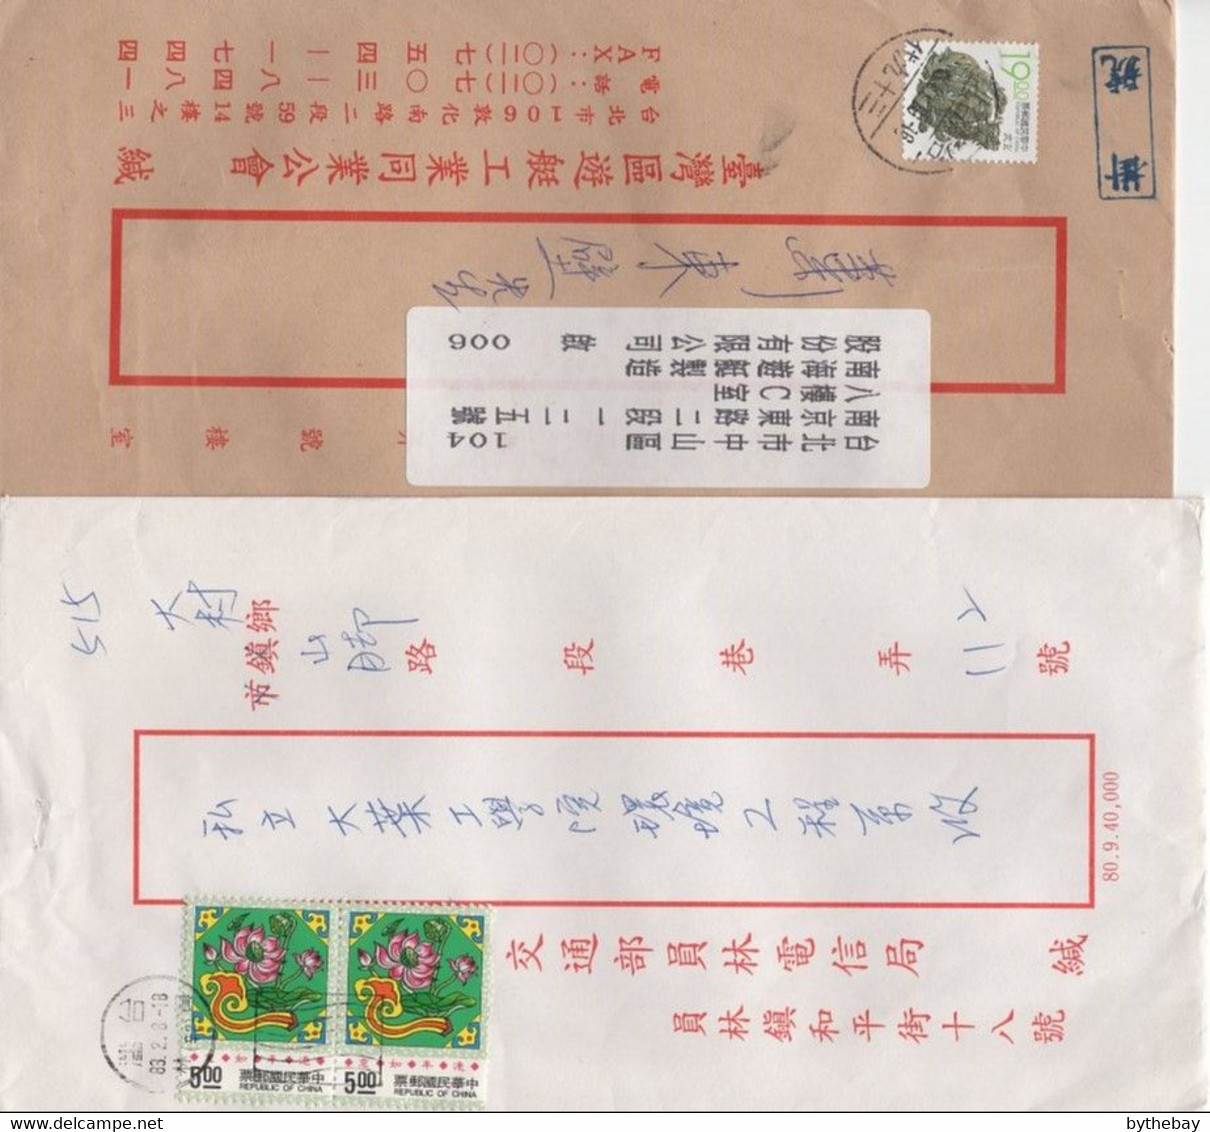 China, Republic of Selection of 25 Covers Domestic, International 1980s-1990s